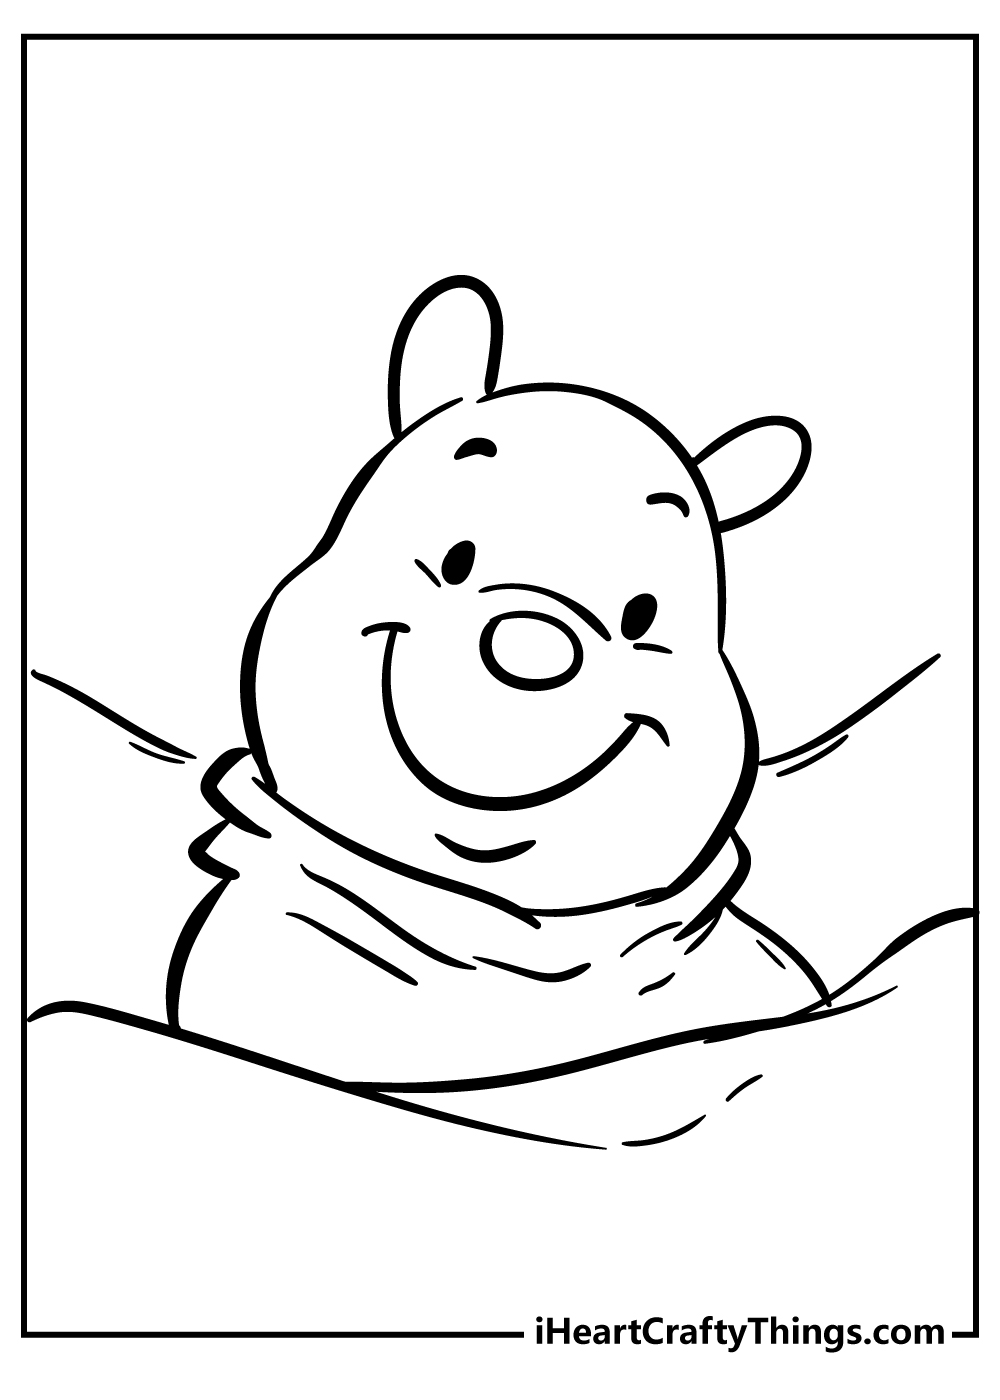 Winnie The Pooh coloring pages free printable